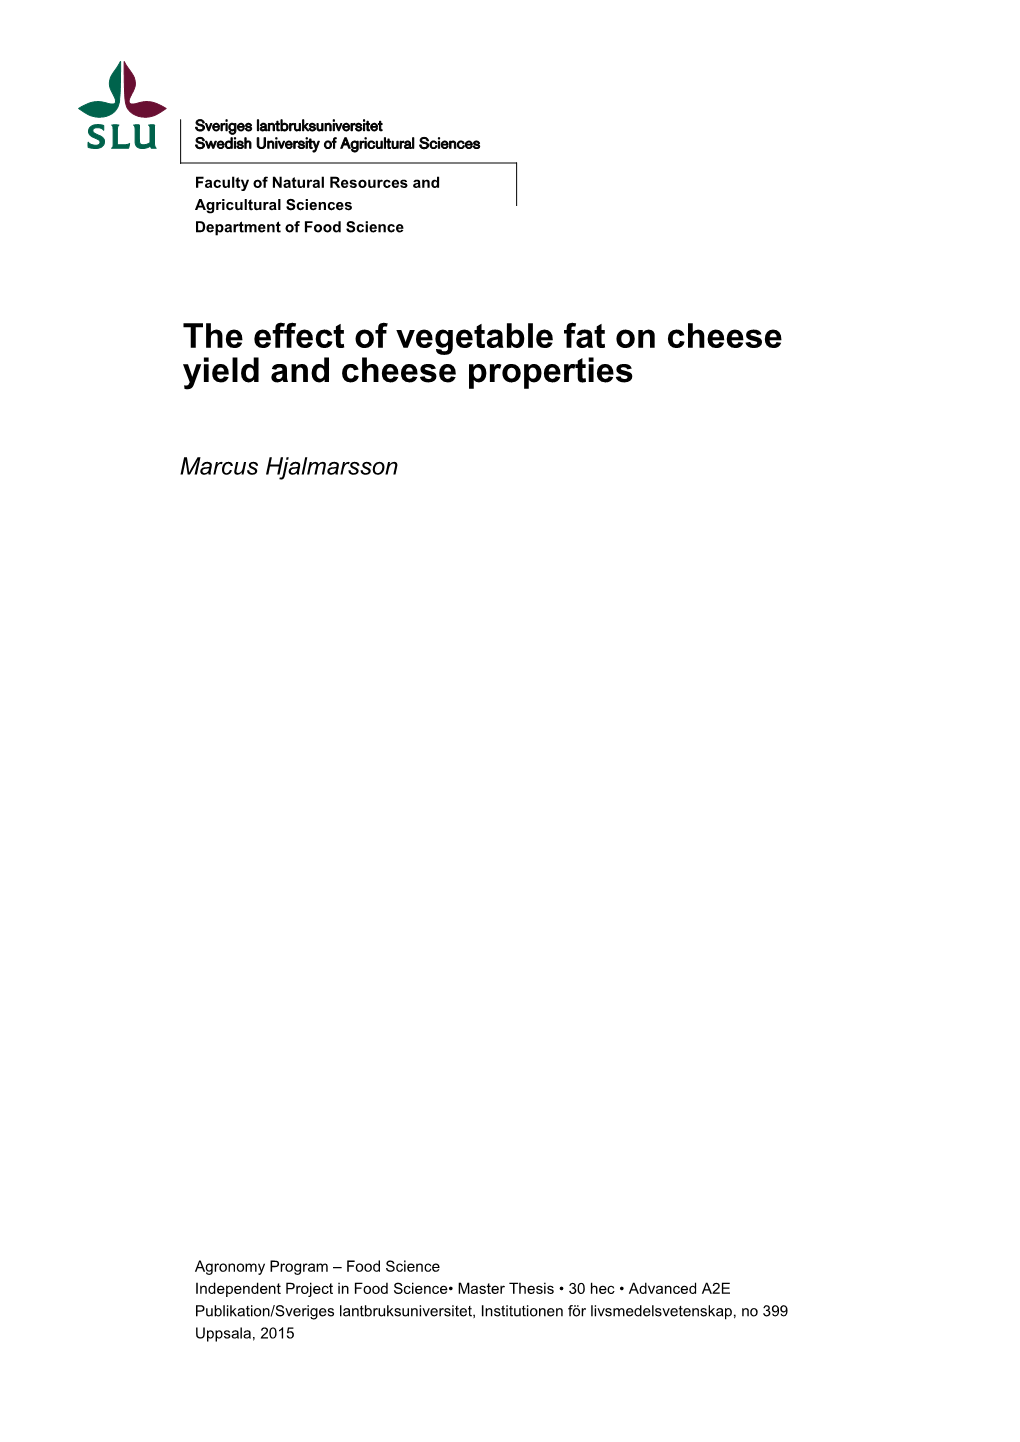 The Effect of Vegetable Fat on Cheese Yield and Cheese Properties